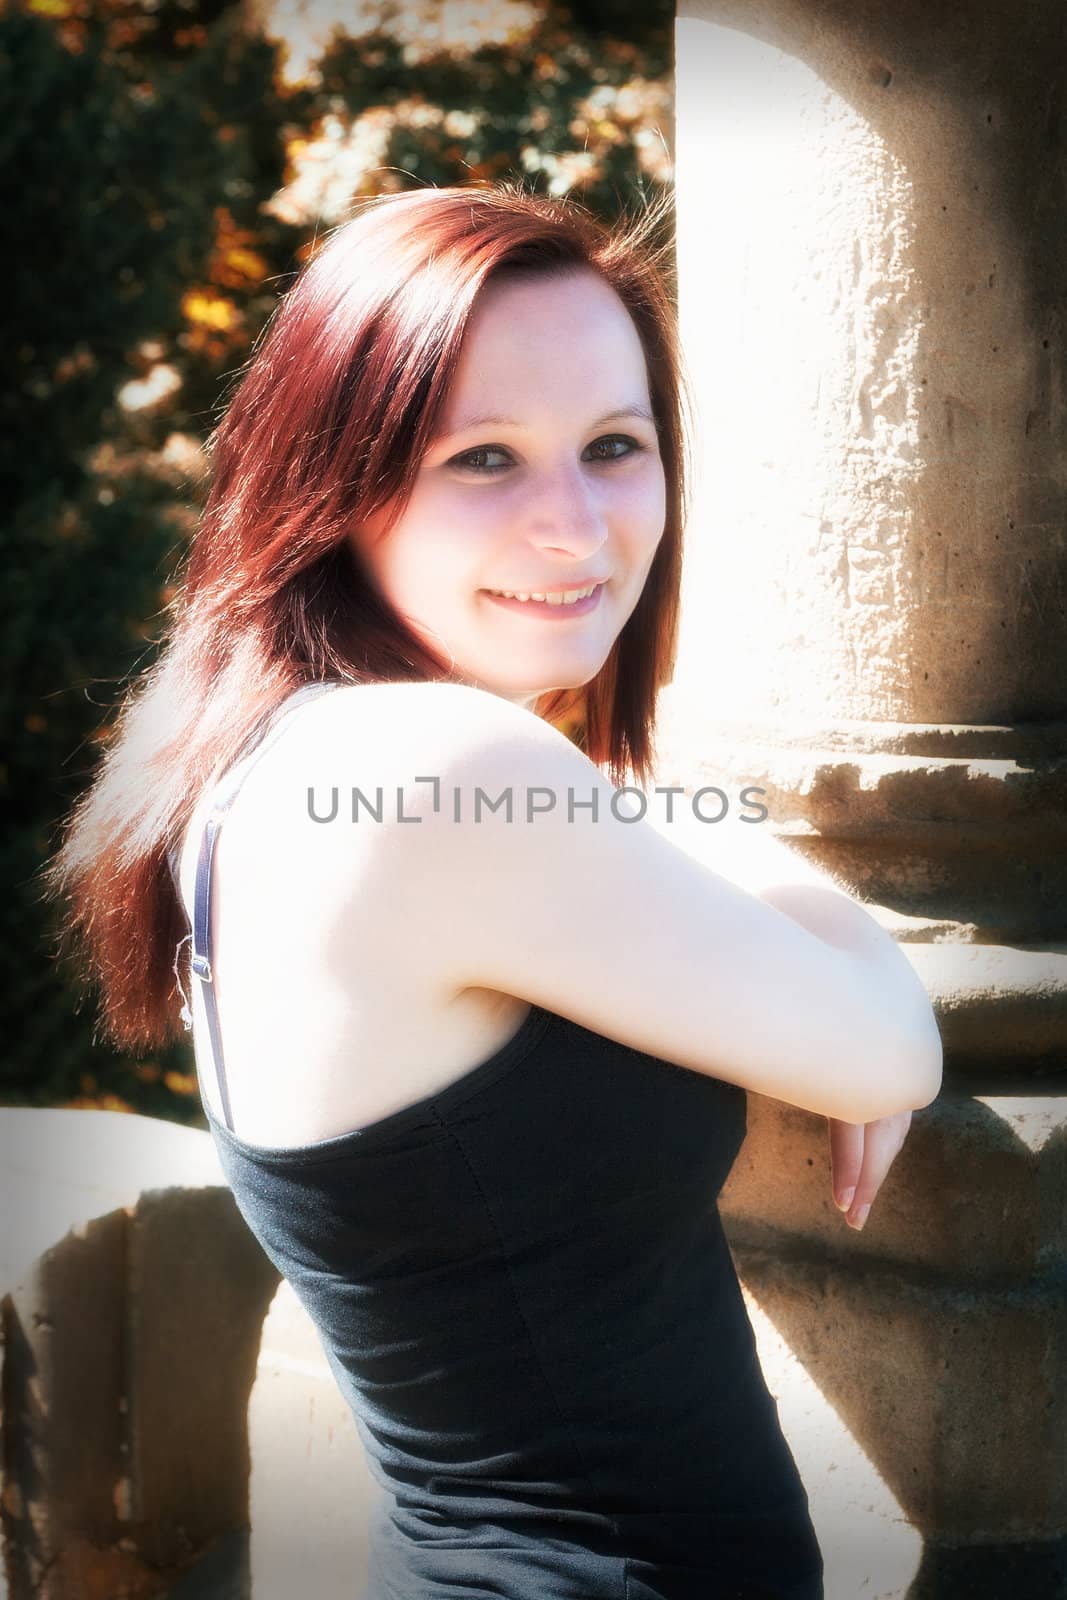 redhead woman lean to a stone column outdoor in a park